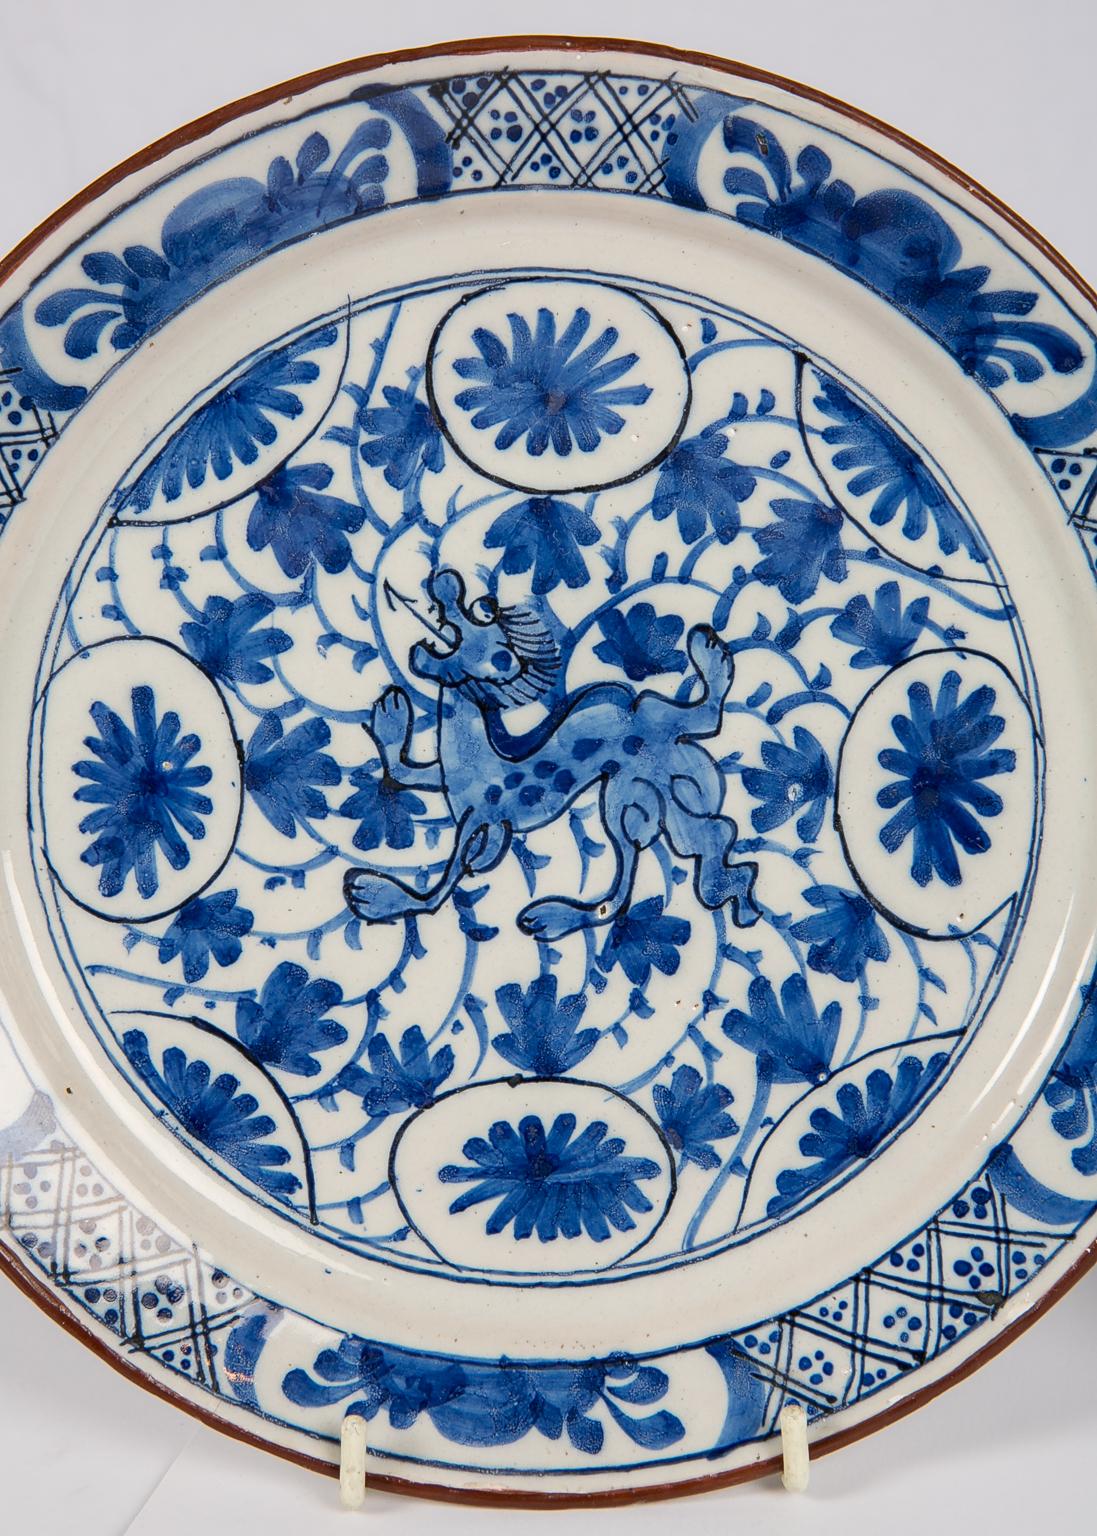 Pair Delft  Blue and White Plates with Dragons Made in Netherlands circa 1780 5